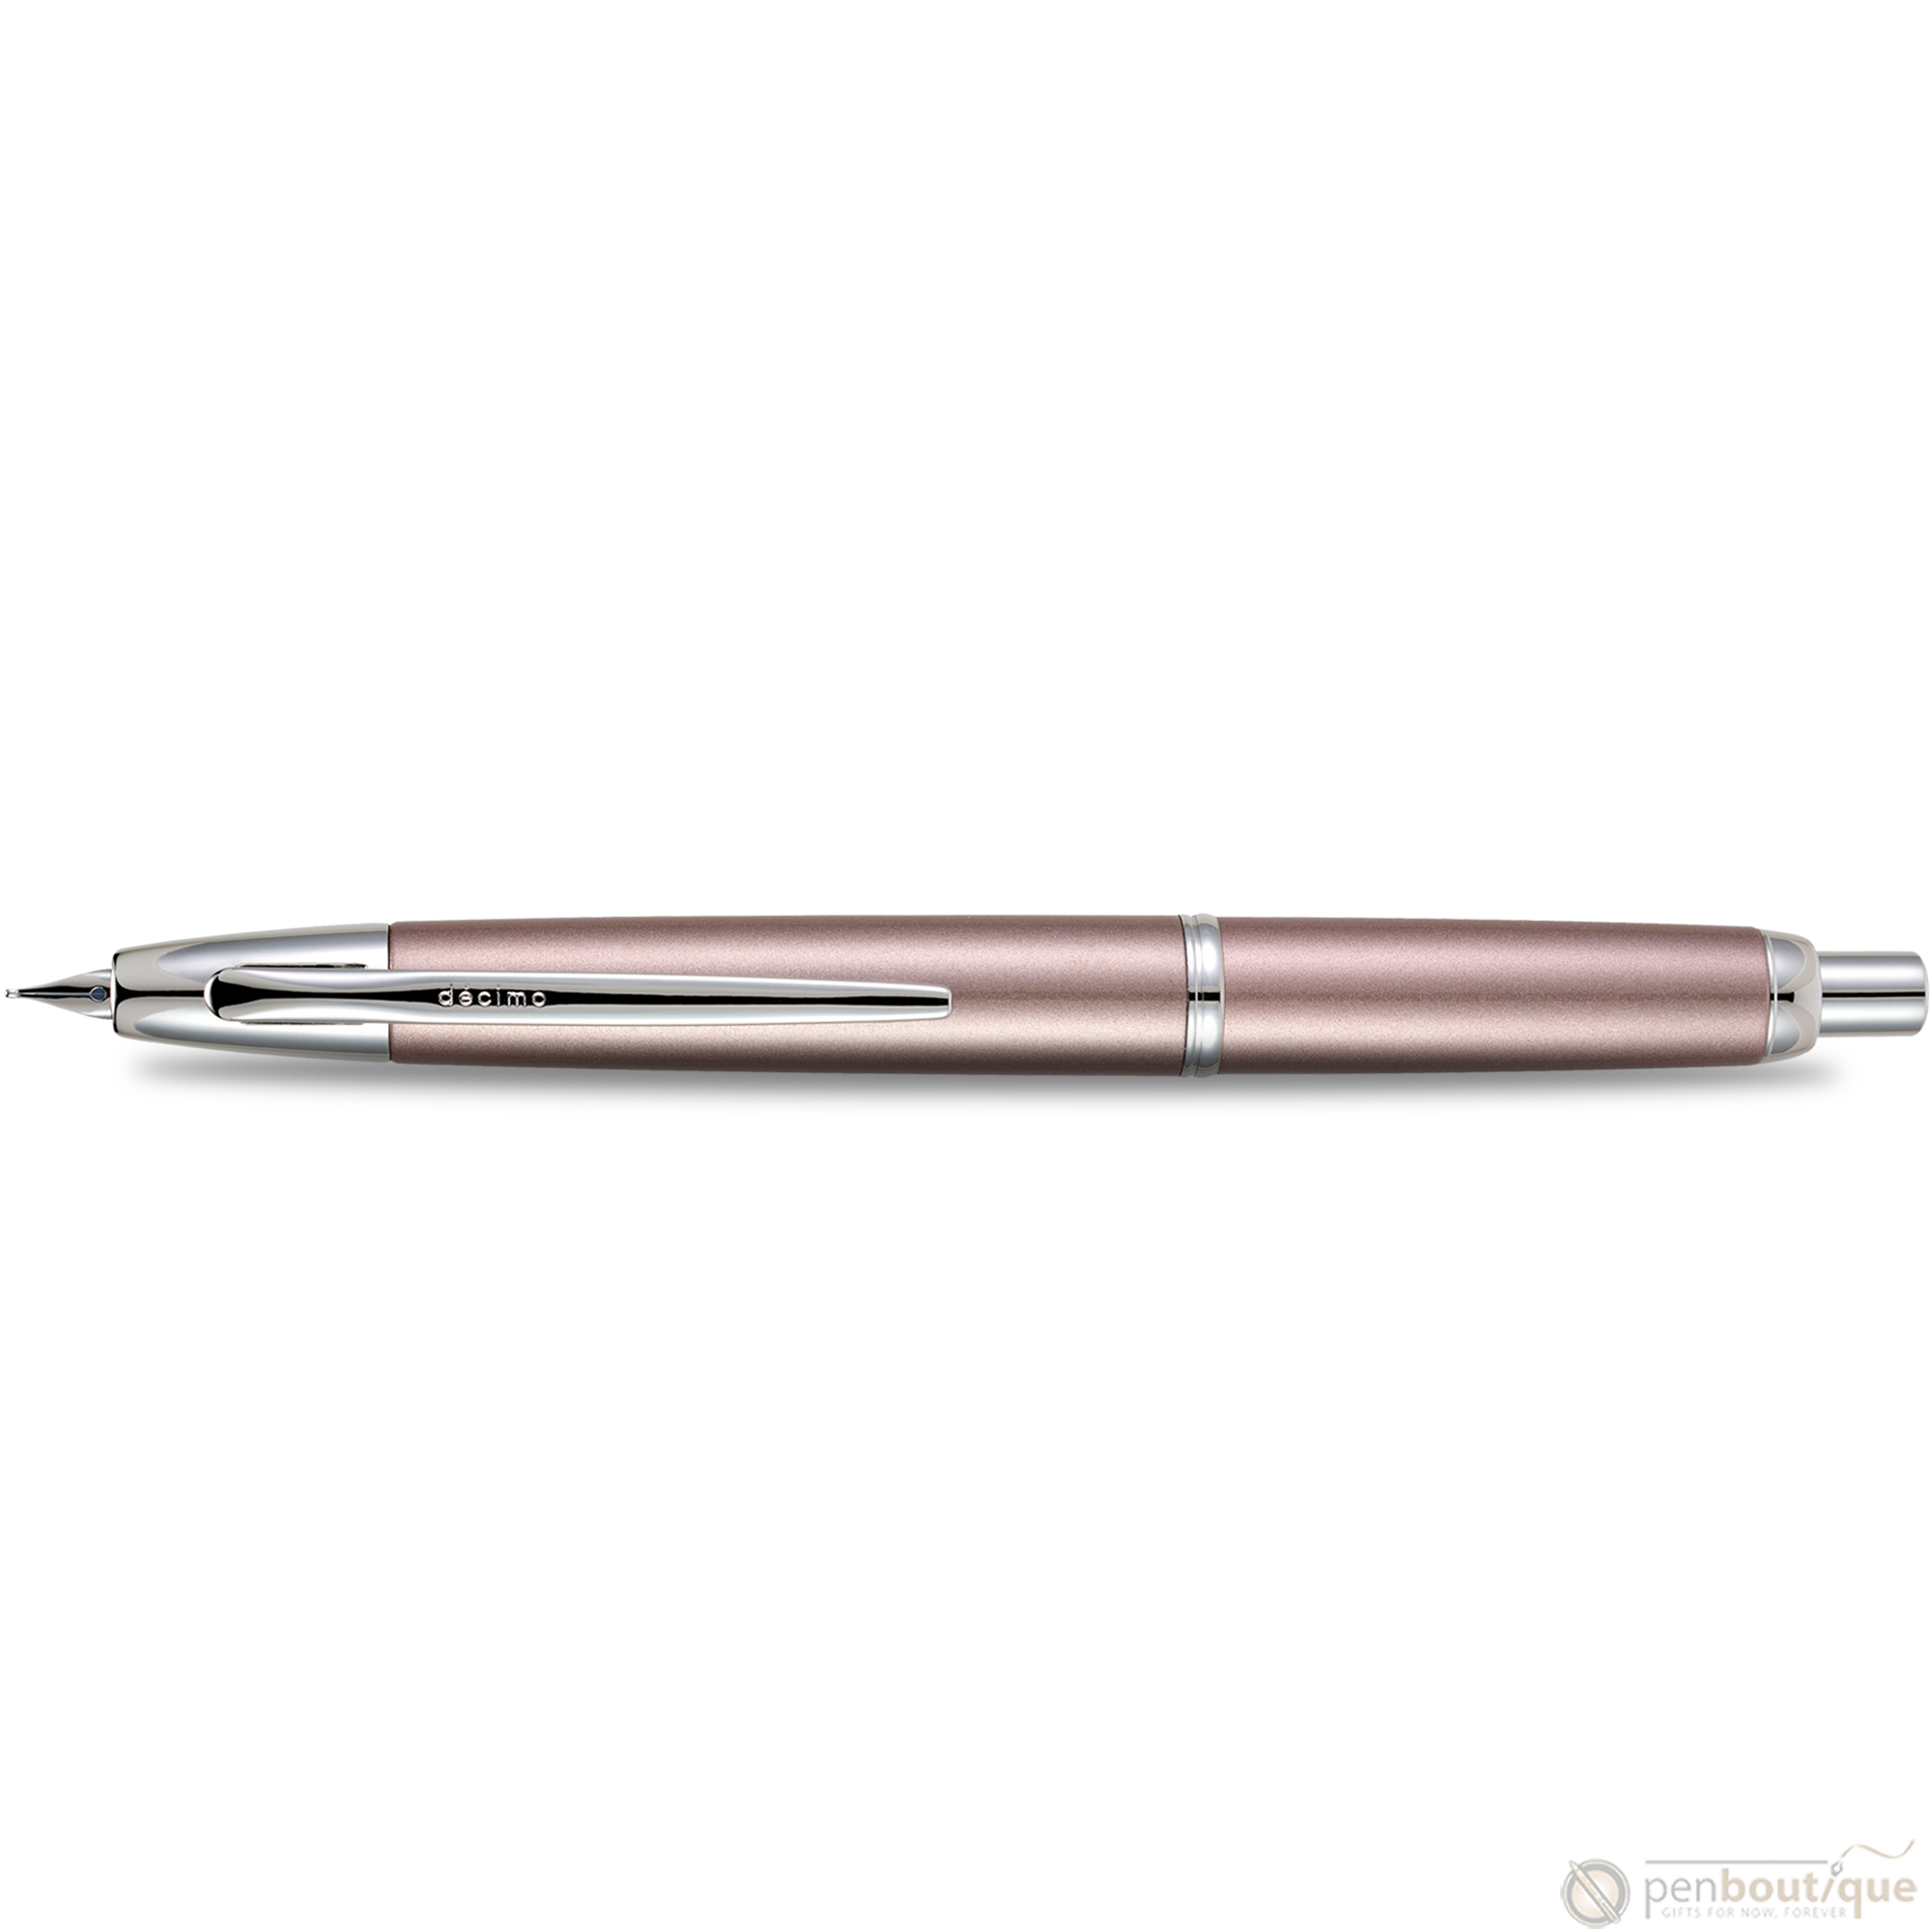 Shop Pilot Vanishing Point Fountain Pen with great discounts and